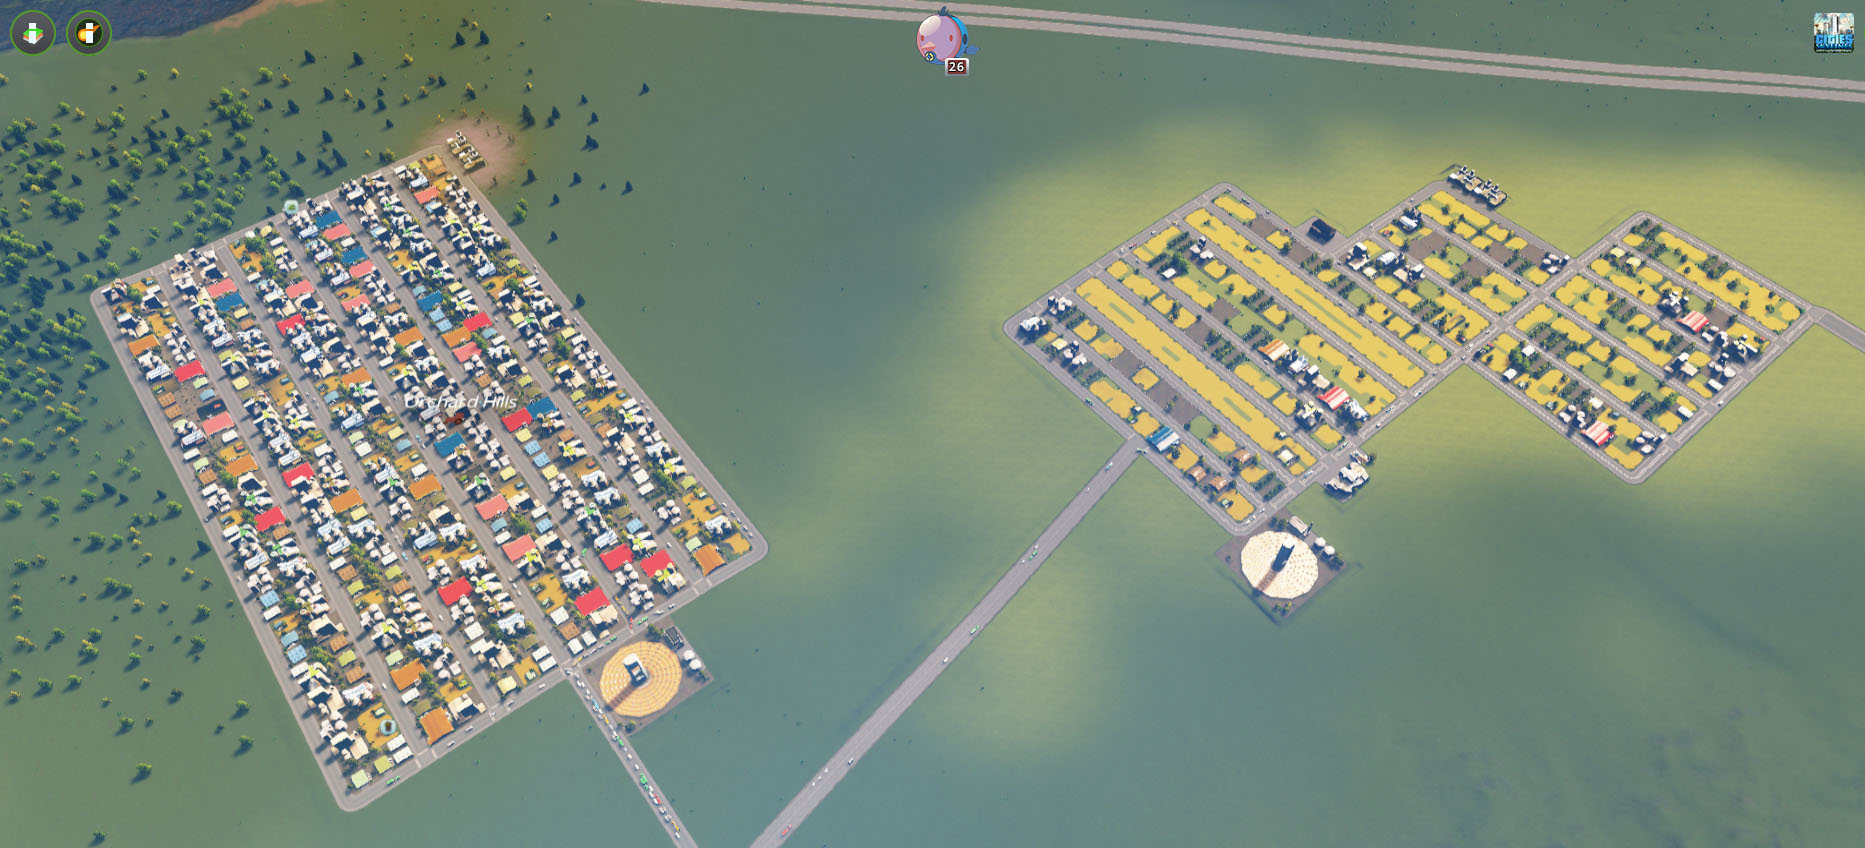 Cities: Skylines Vanilla and DLC Industry Guide - 2.5 The experiment - DE6D5E1